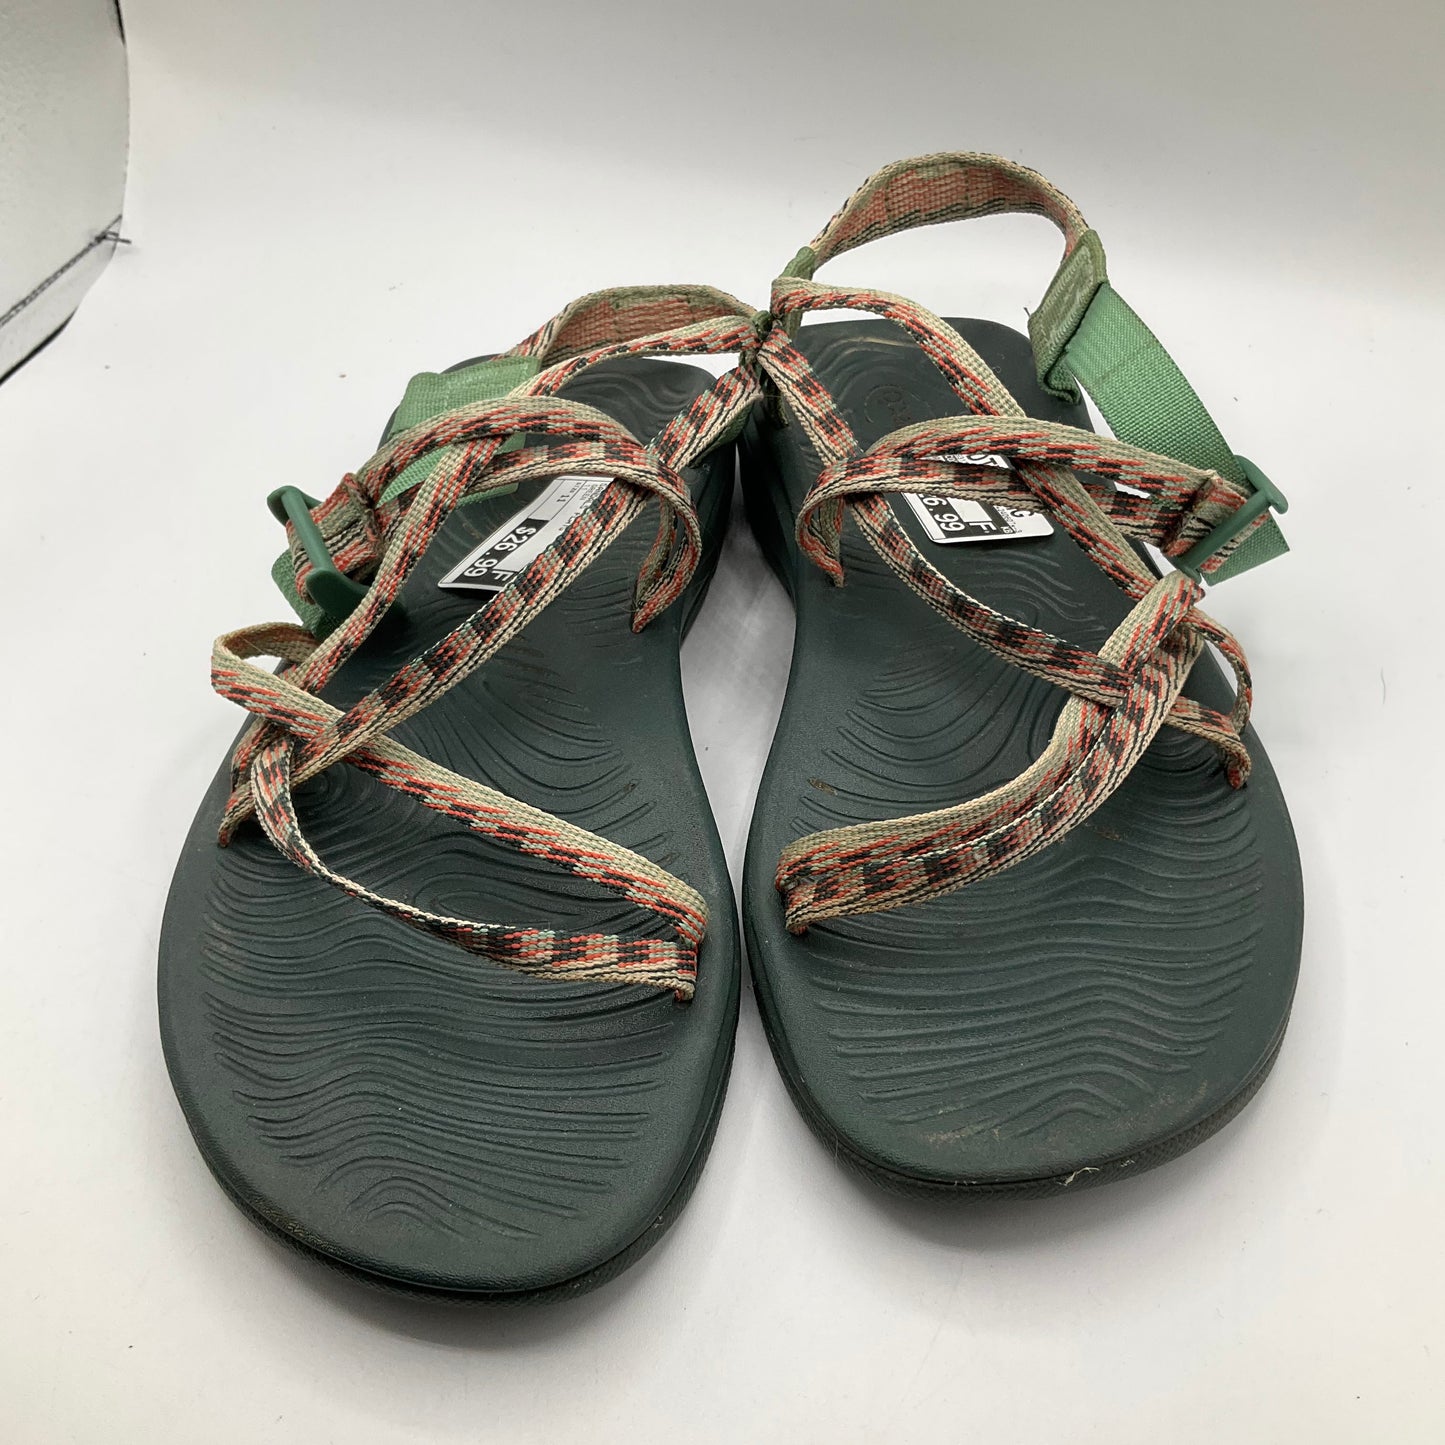 Green Sandals Flats Chacos, Size 11